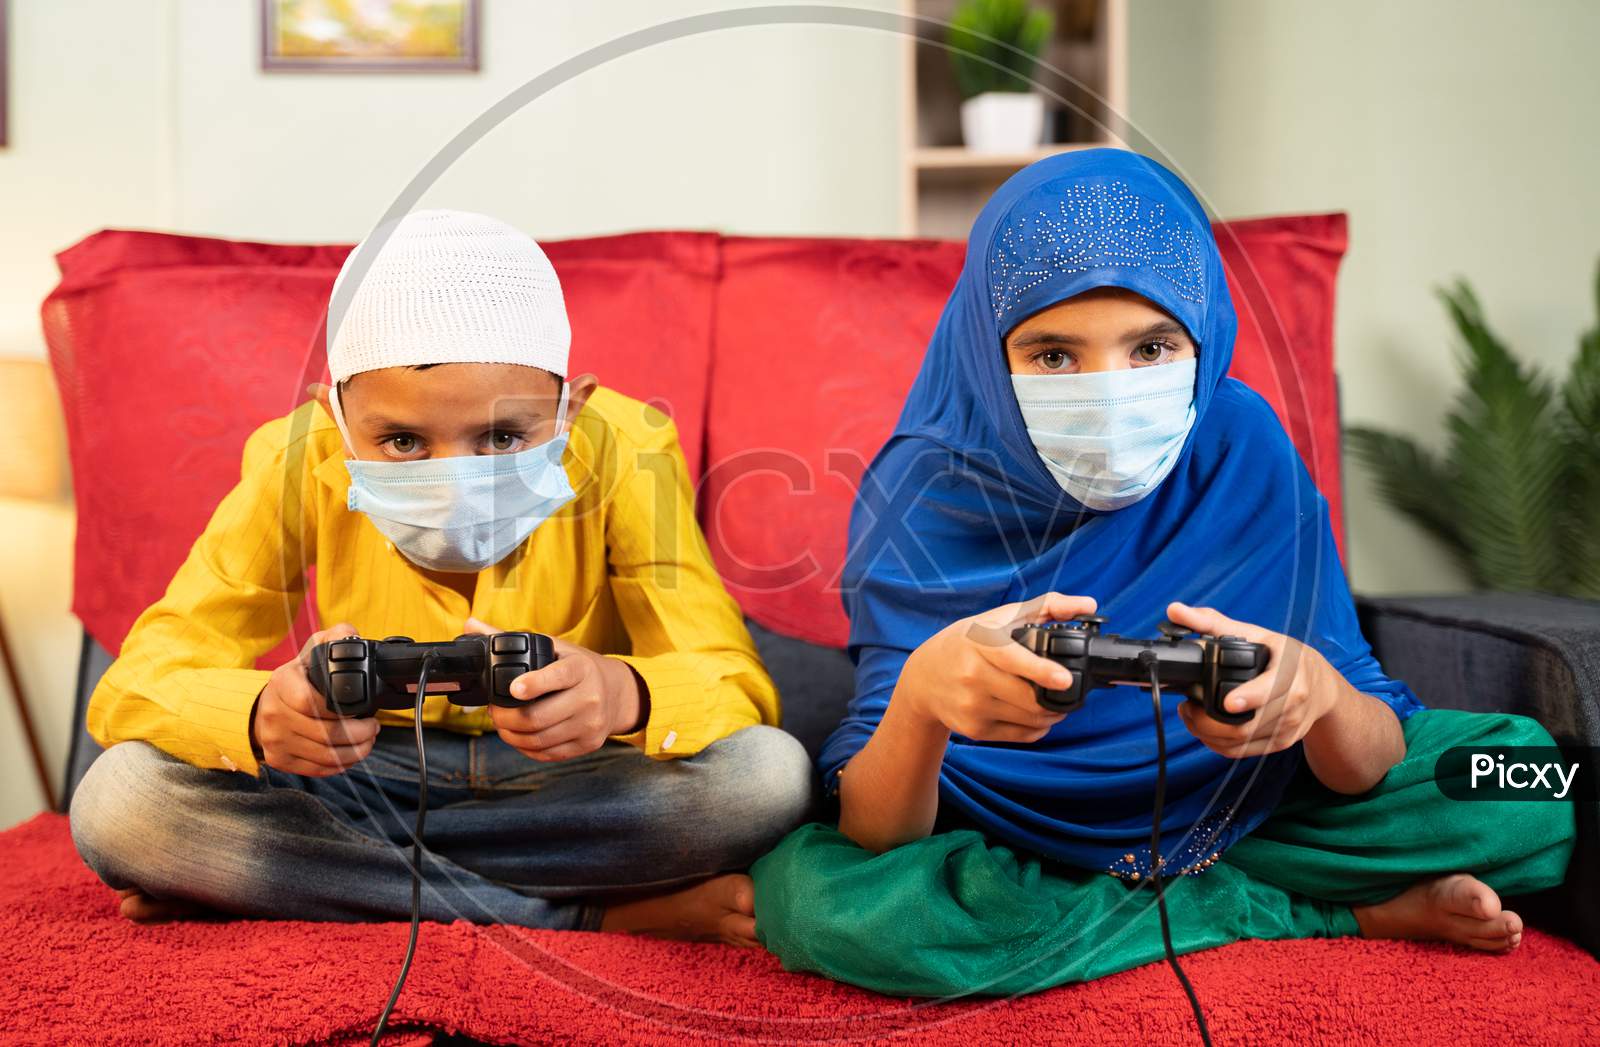 Two Muslim Kids With Medical Face Mask Busy Playing Video Game Using Gamepad At Home - Concept Of Kids On Game During Coronavirus Covid-19 Lockdown.